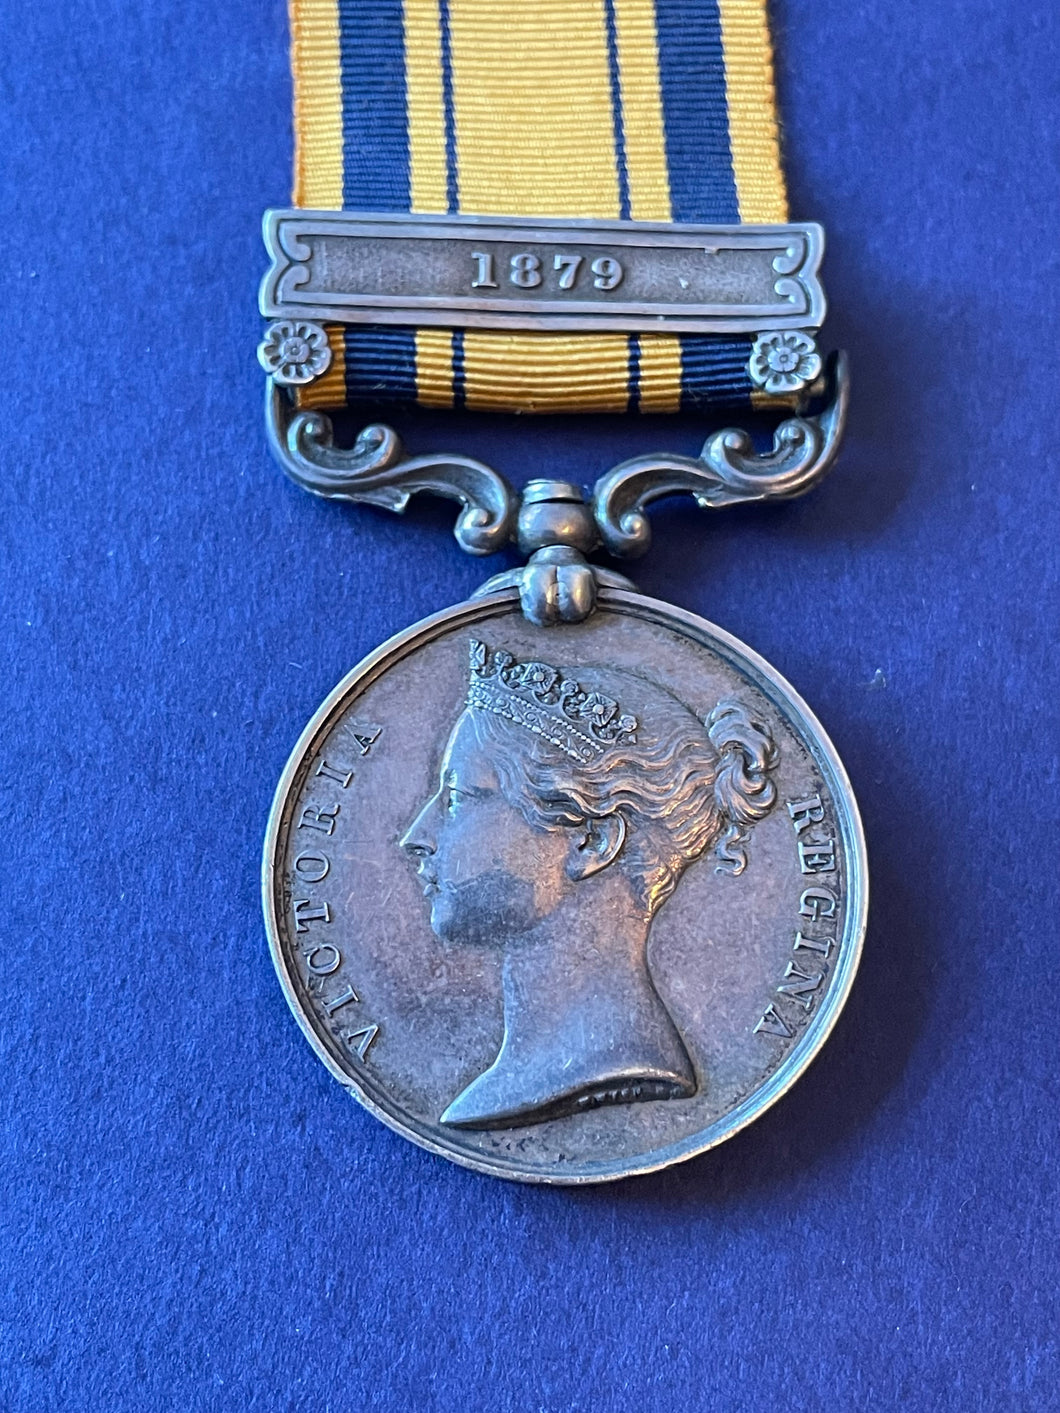 South Africa General Service Medal, 1879 bar (‘Anglo-Zulu War’) - Pte. J. Scanlan, Army Service Corps